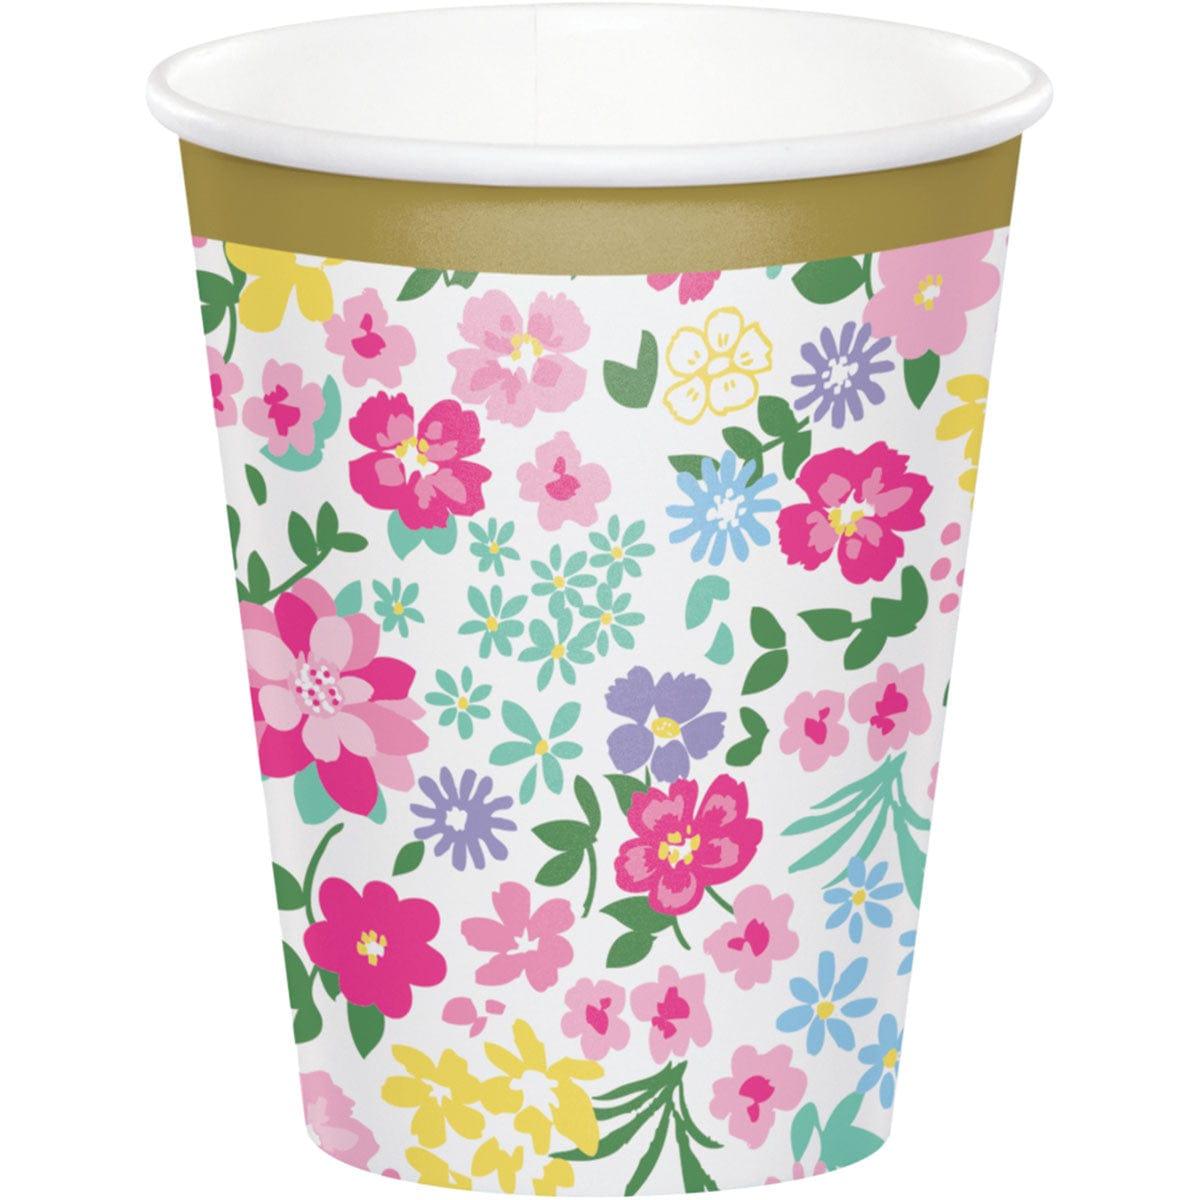 CREATIVE CONVERTING Kids Birthday Floral Tea Party Paper Cups, 9 oz, 8 Count